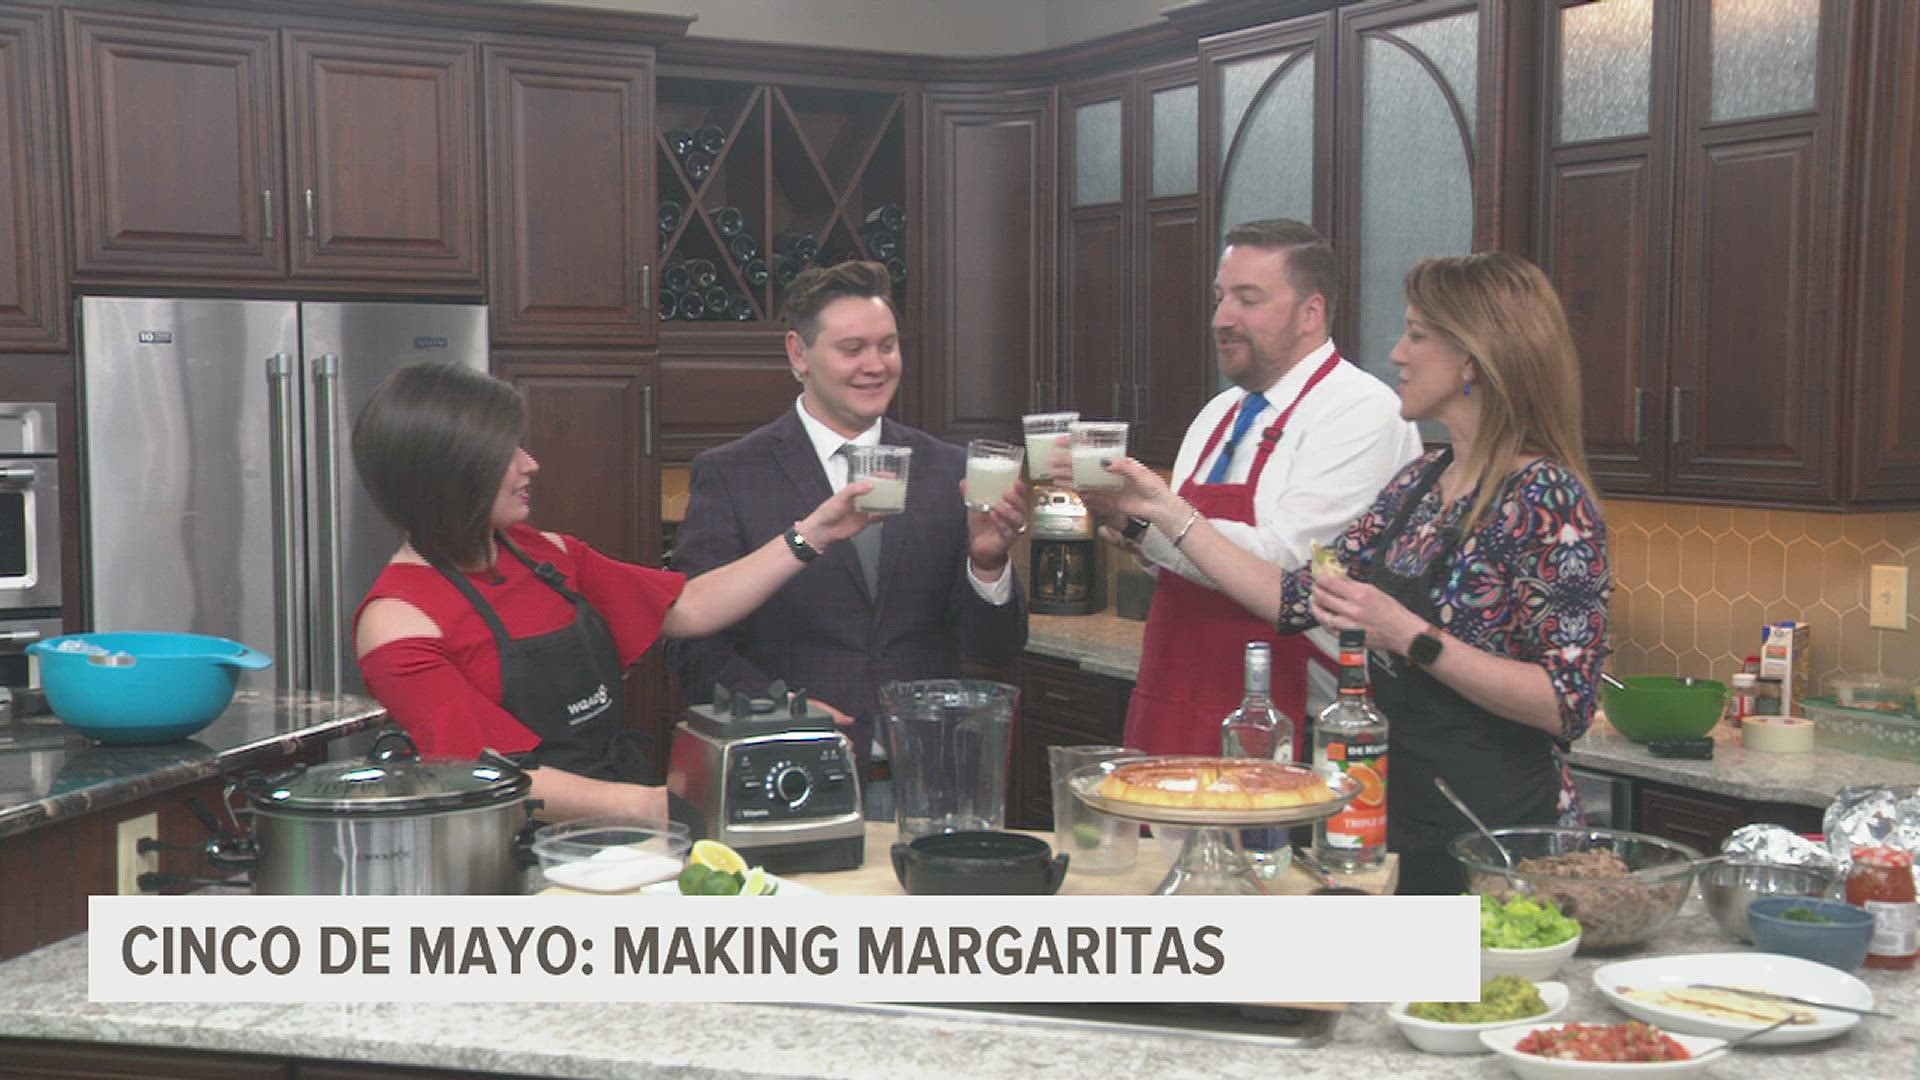 David Bohlman shows the GMQC crew how to make frozen margaritas at home with a little help from an Ina Garten recipe.